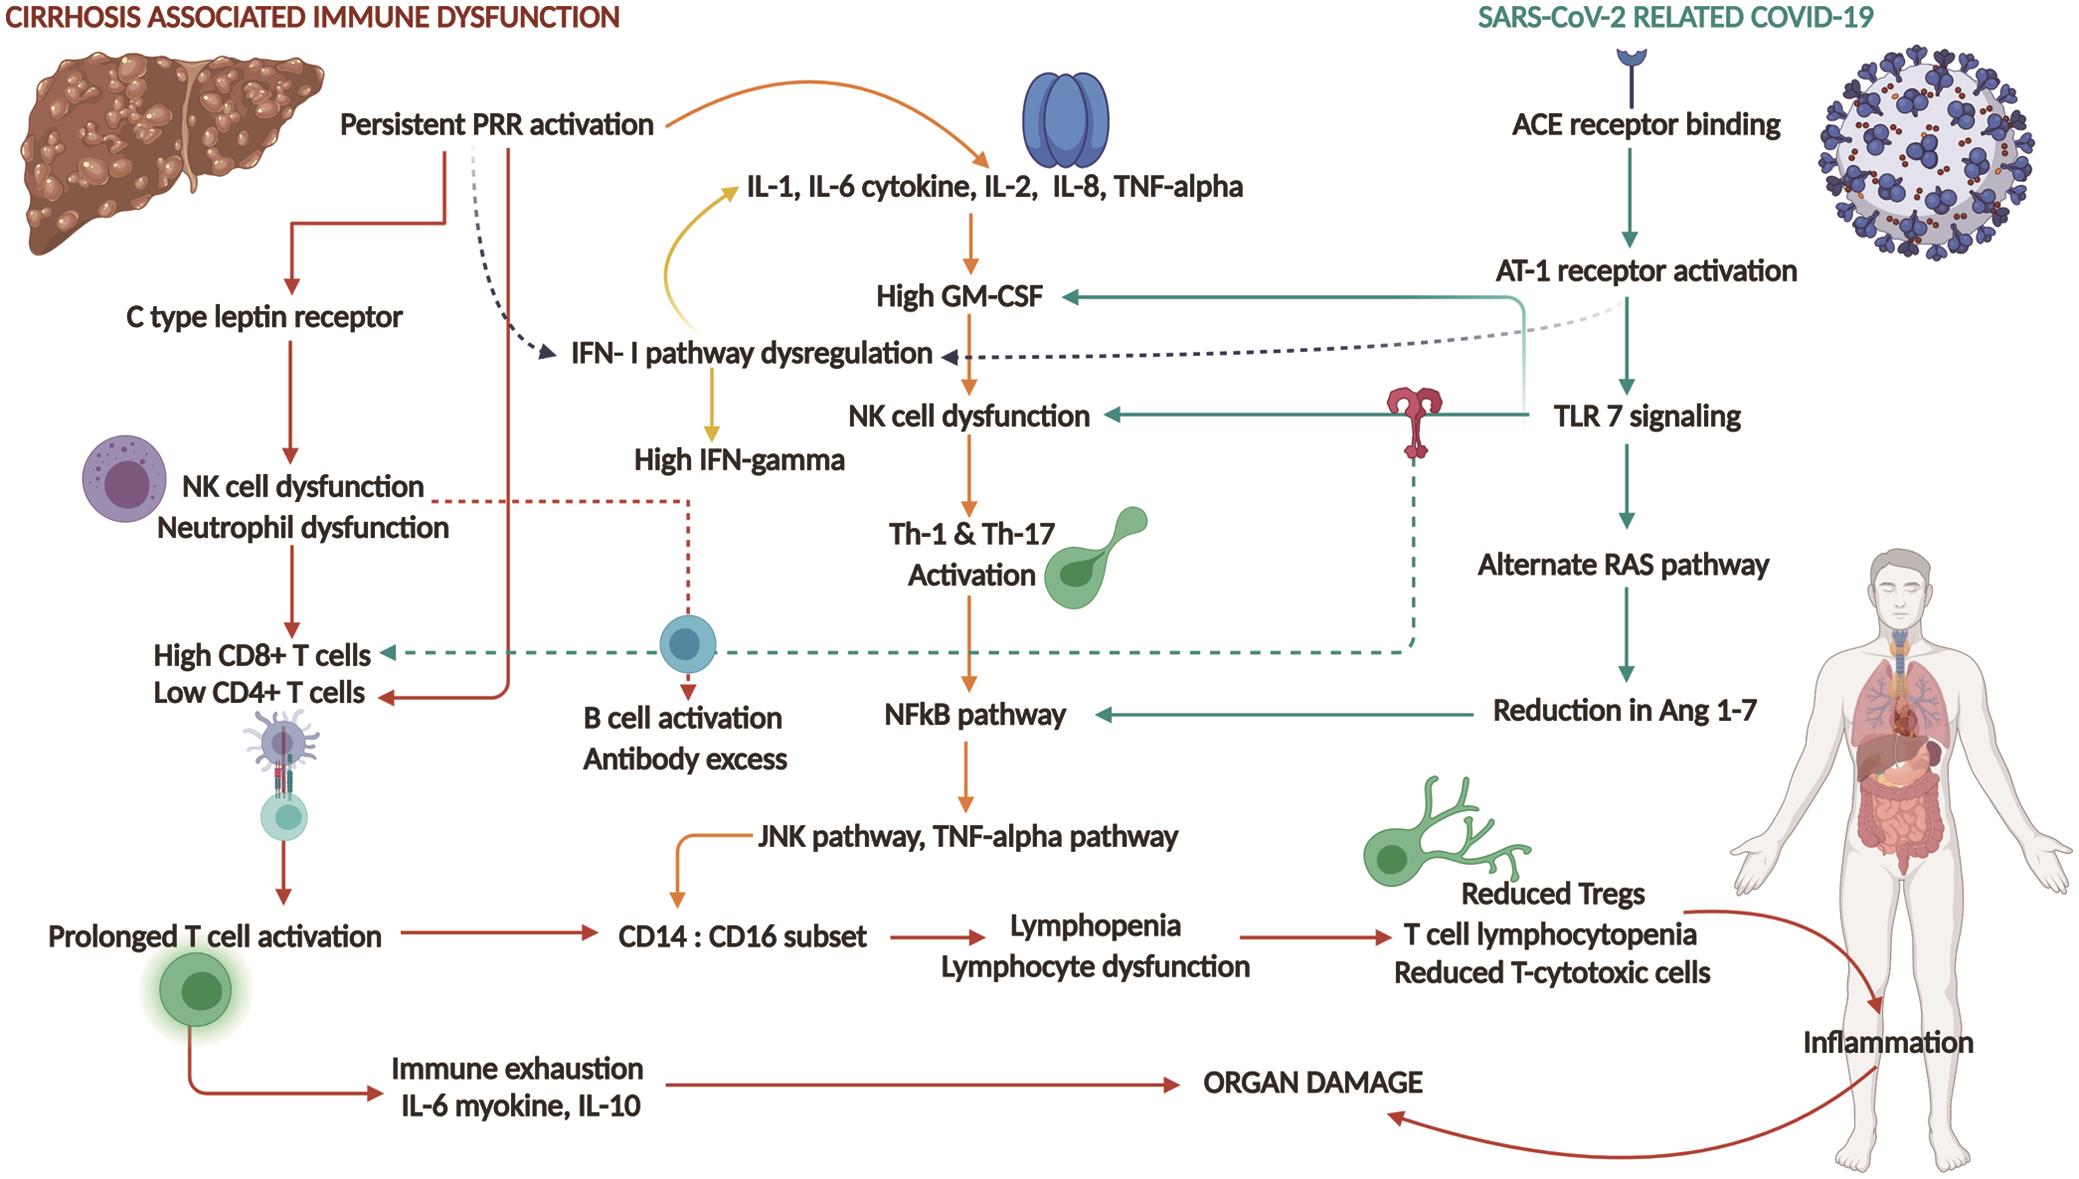 Schematic diagram showing common components and pathways driving cirrhosis-associated immune dysfunction and novel coronavirus-related disease.